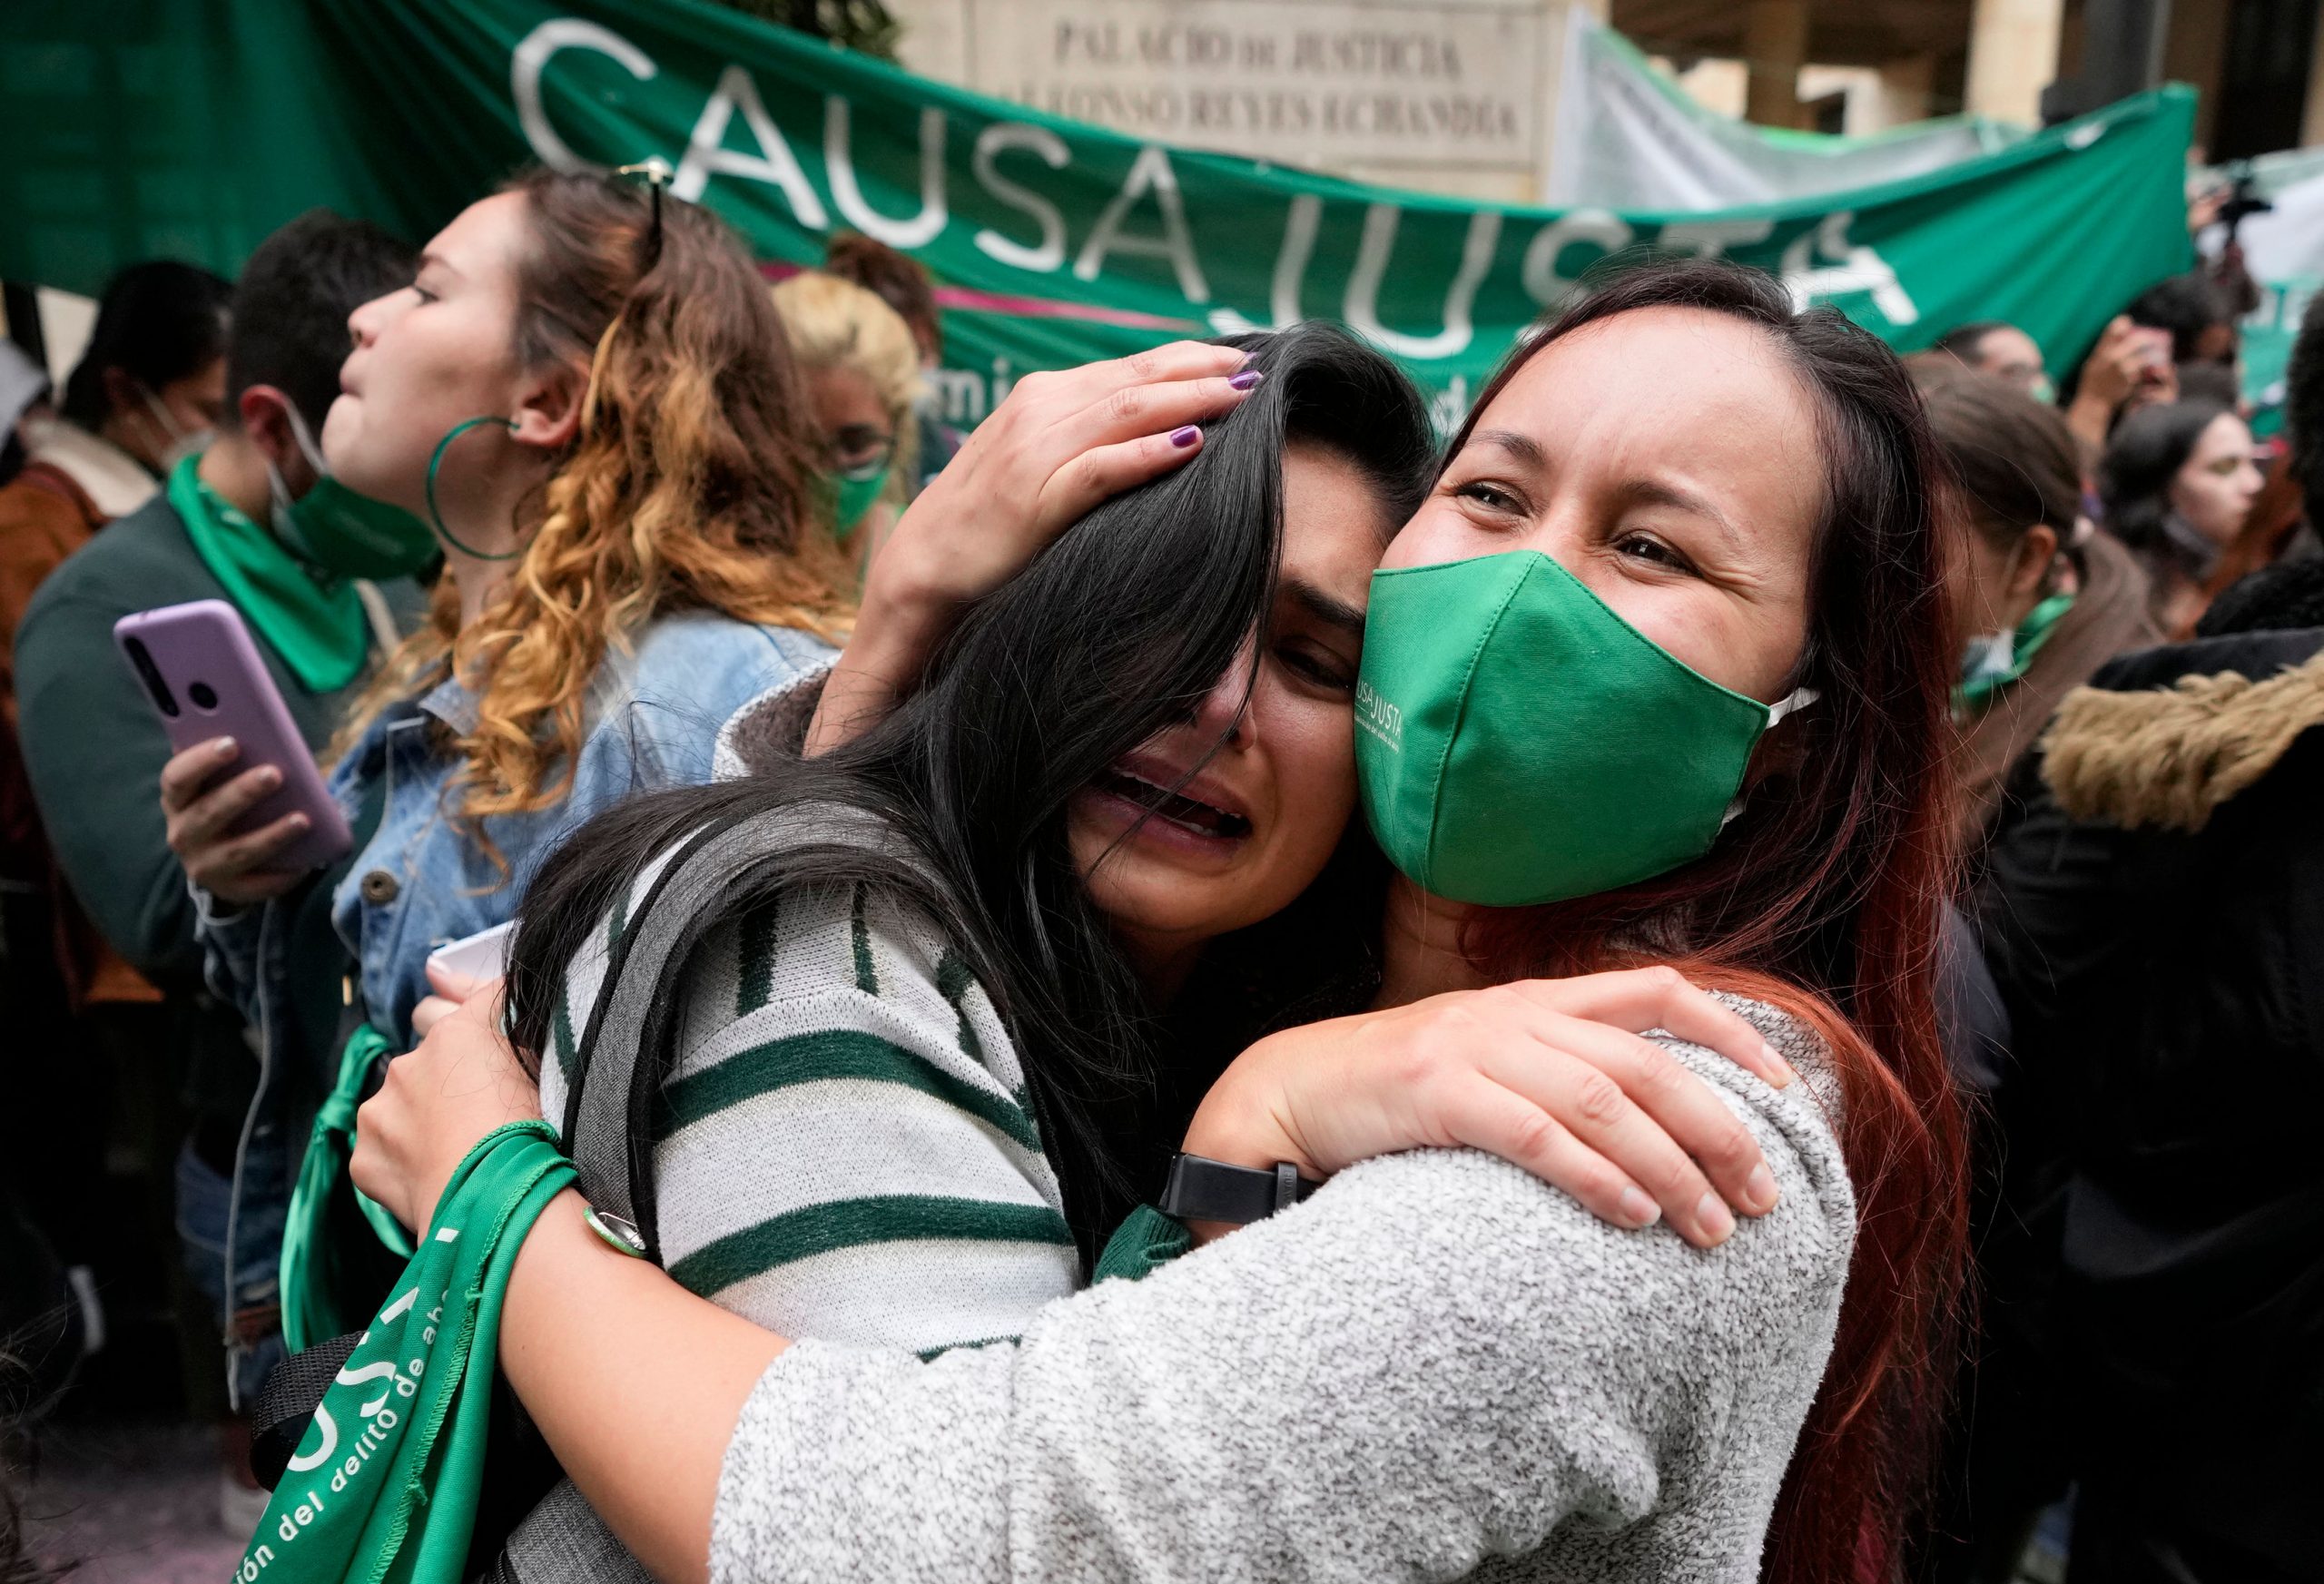 Colombia’s highest court legalises abortion up to 24 weeks